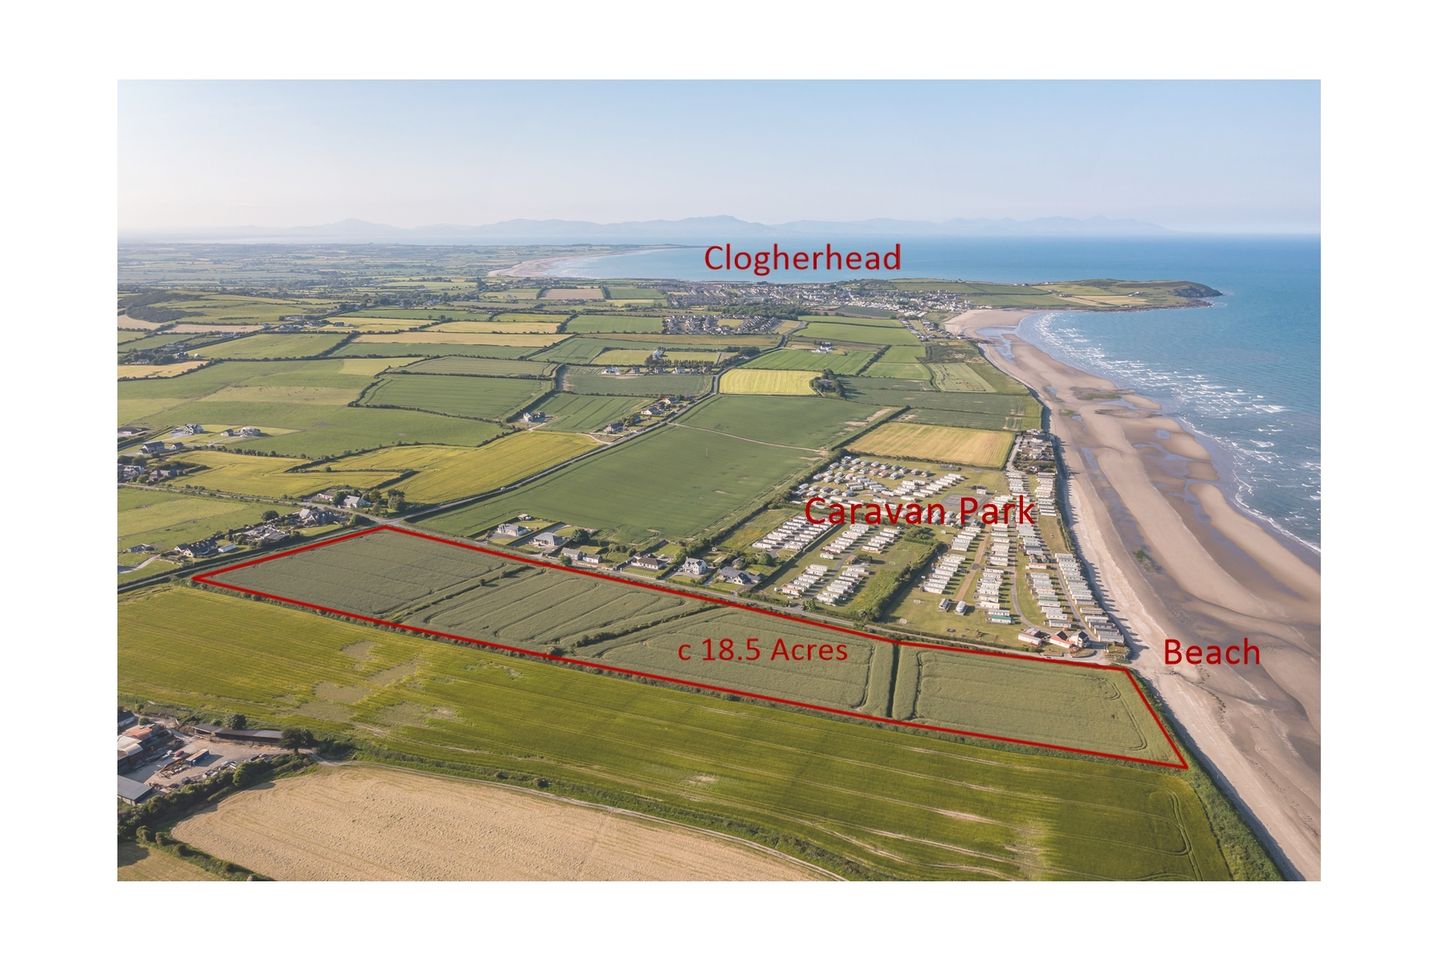 18.483 Acres, Tobertoby, Clogherhead, Co. Louth